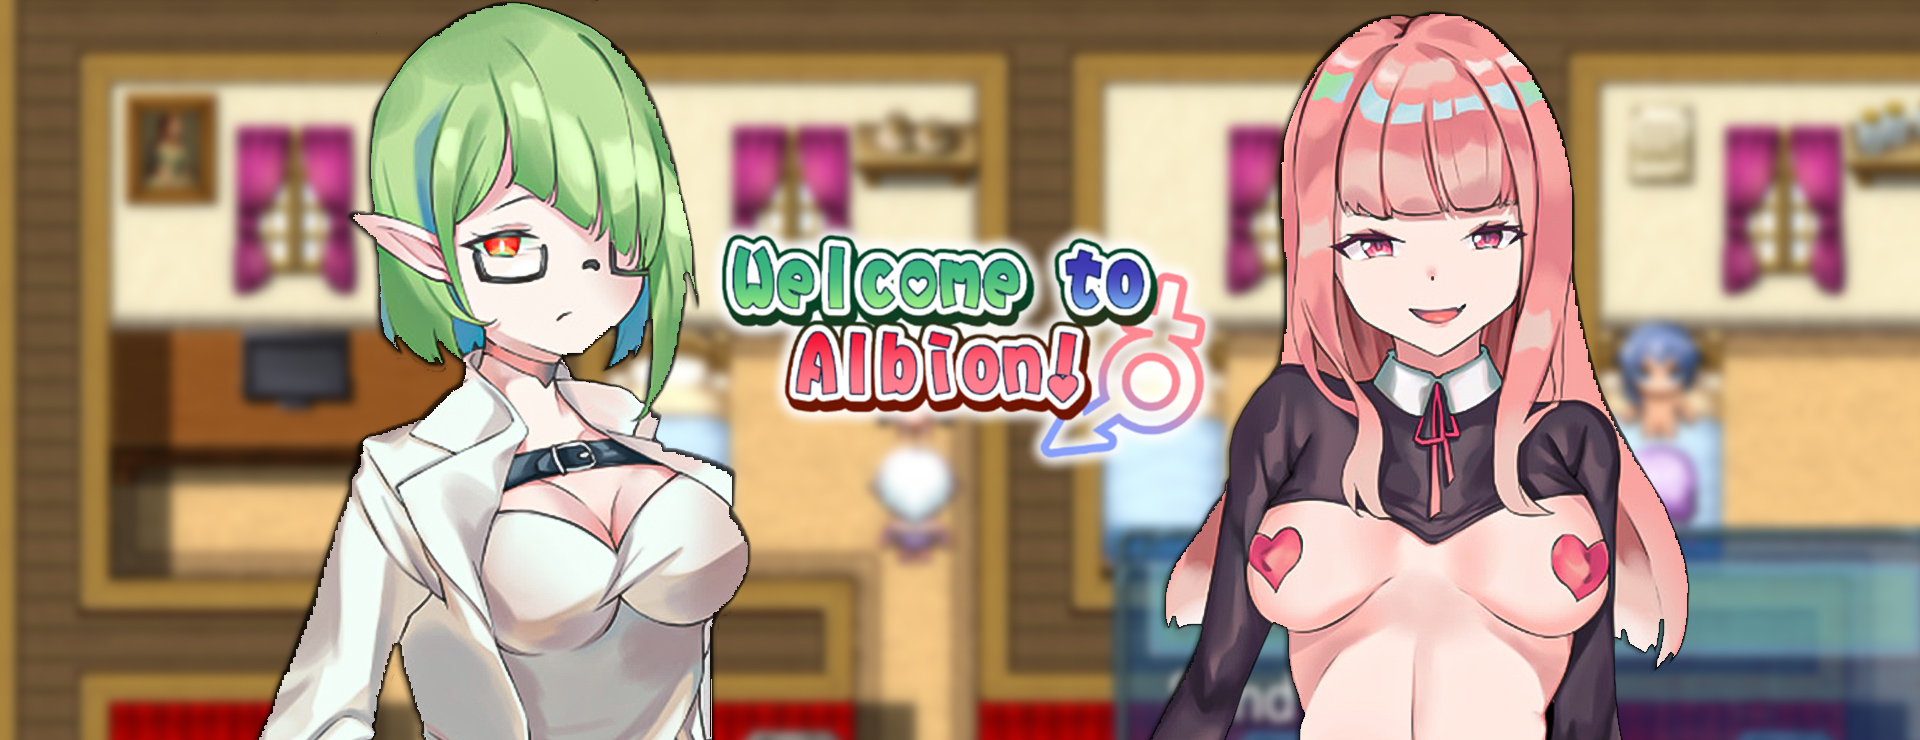 Welcome to Albion! - RPG Jeu